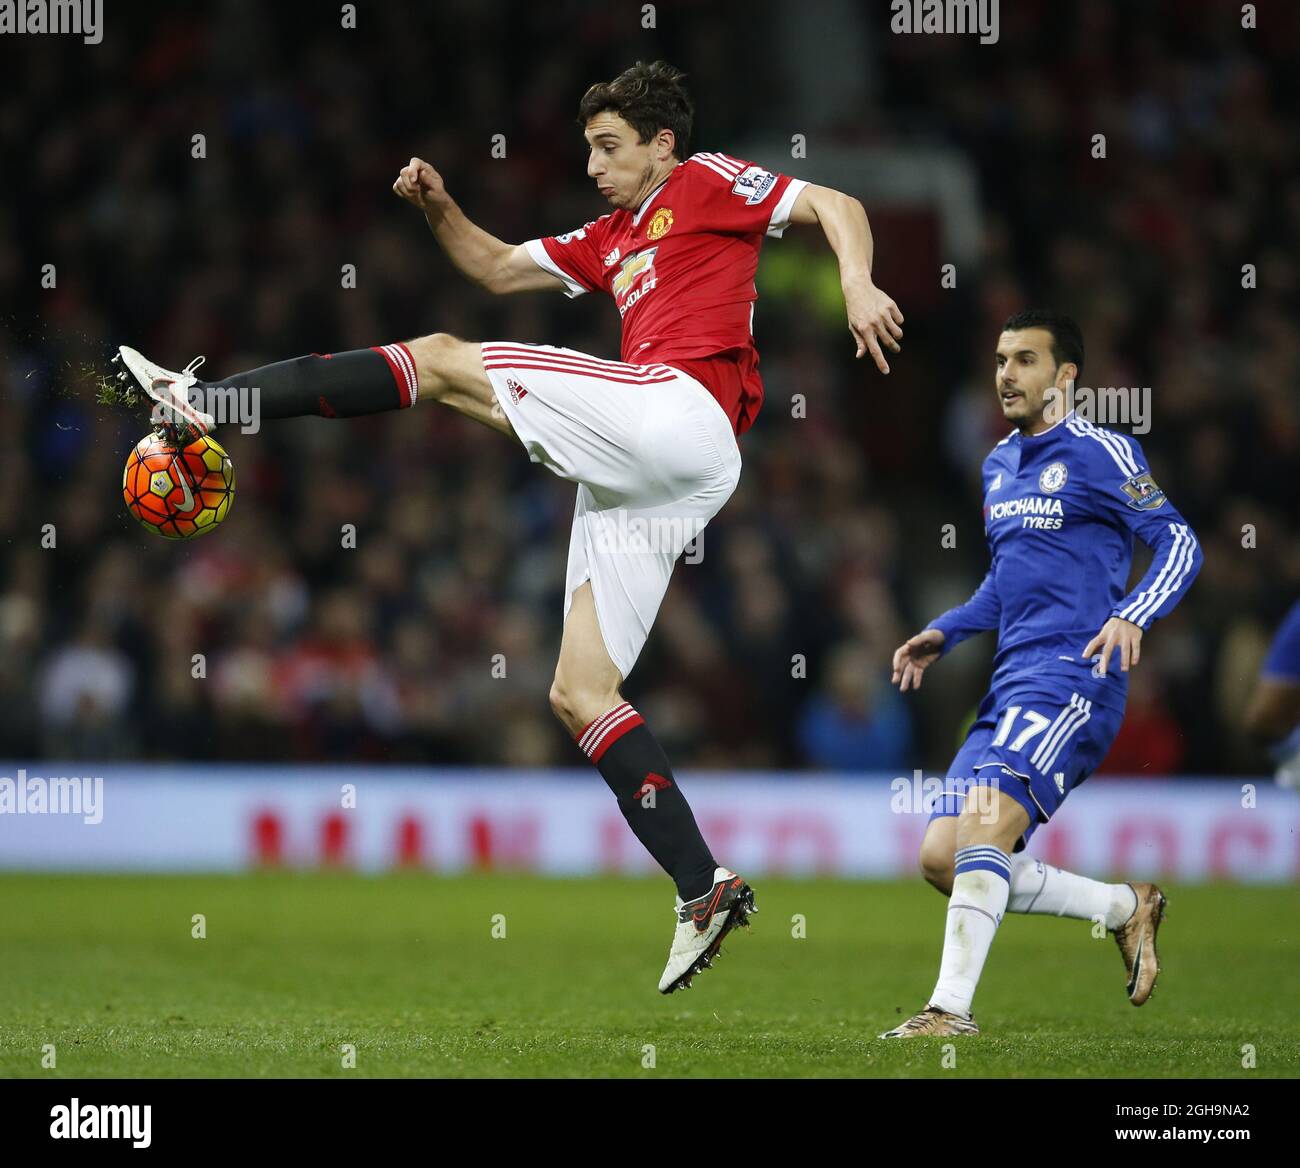 Image #: 41636032 28 décembre 2015 - Manchester, Royaume-Uni - Matteo Darmian of Manchester United - Premier League anglaise - Manchester Utd vs Chelsea - Old Trafford Stadium - Manchester - Angleterre - 28 décembre 2015 Banque D'Images